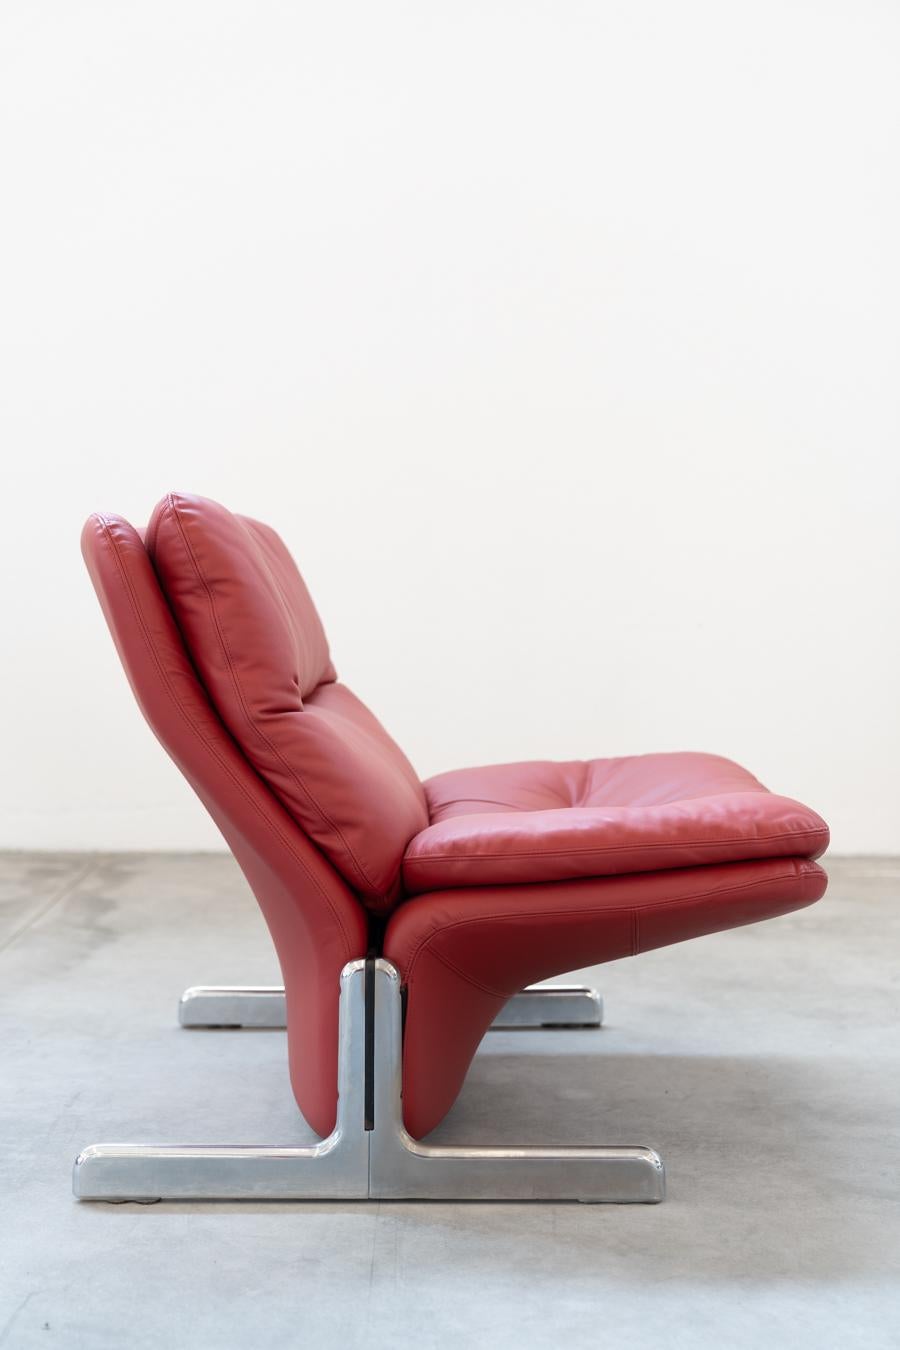 Red leather armchair and footstool, Vitelli and Ammannati, for Brunati 70/80s In Excellent Condition For Sale In Manzano, IT